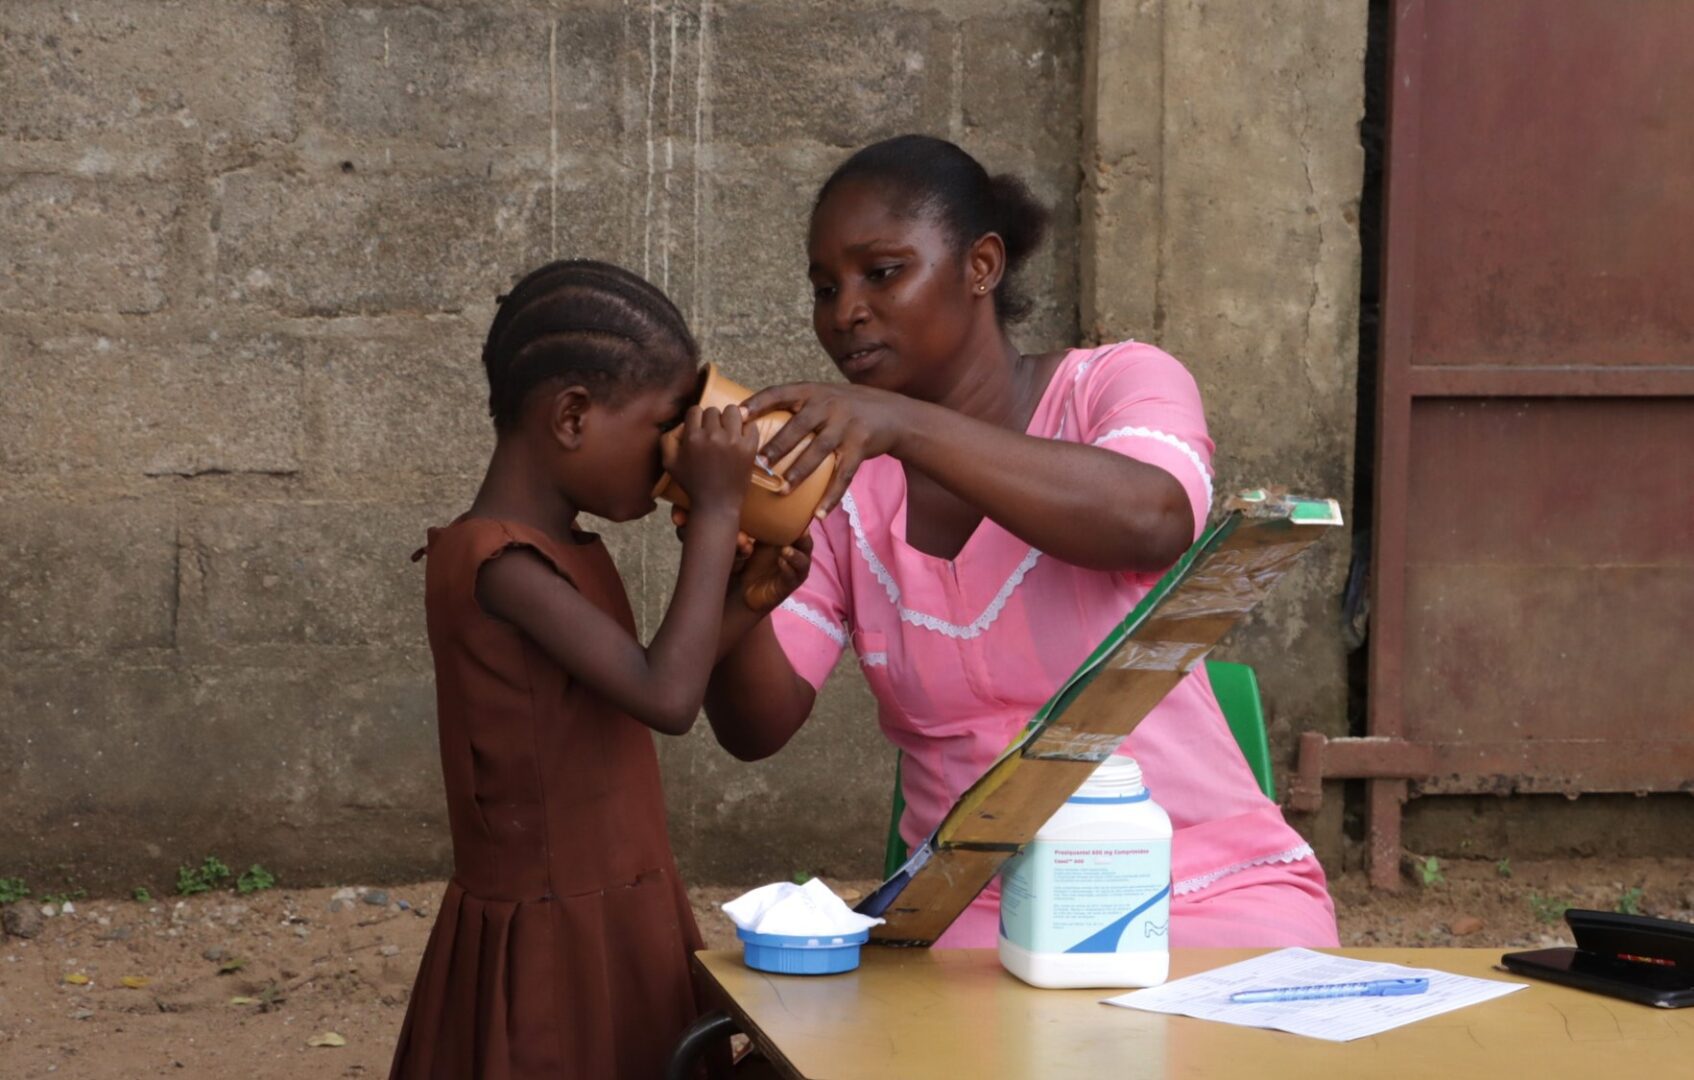 A female healthcare worker gives a young girl a drink of water.